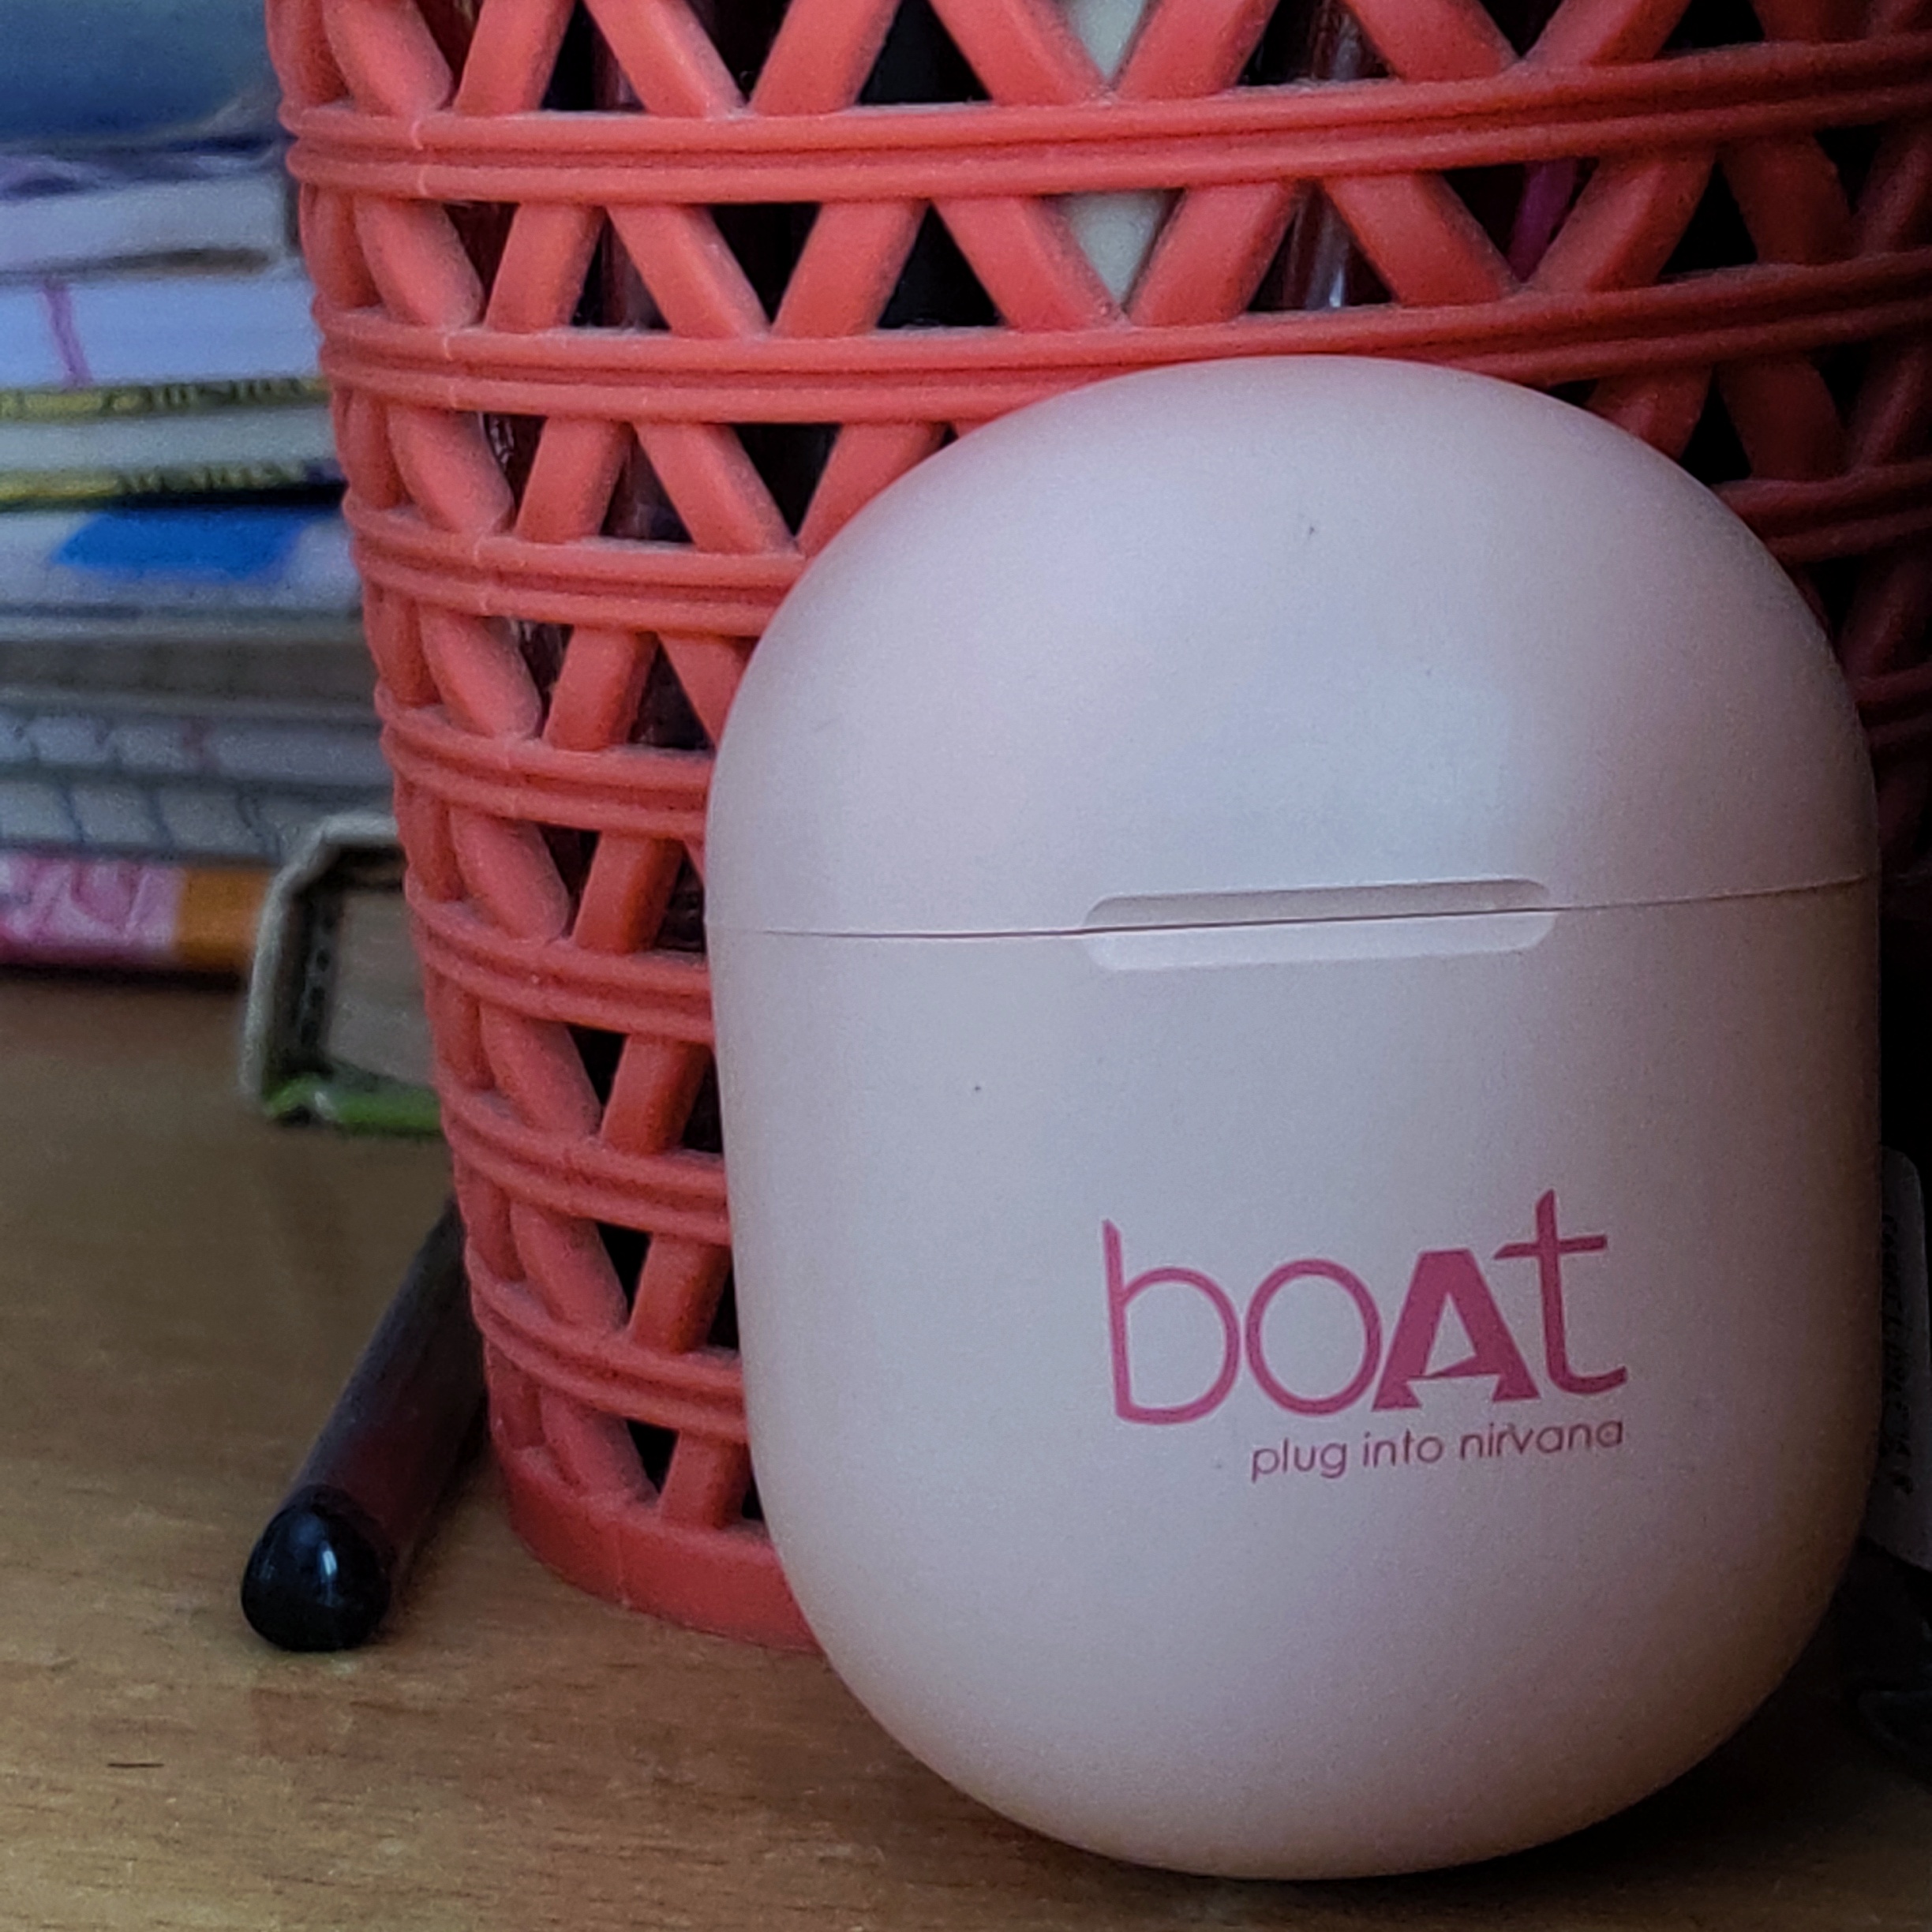 Boat Airdopes 381 Review